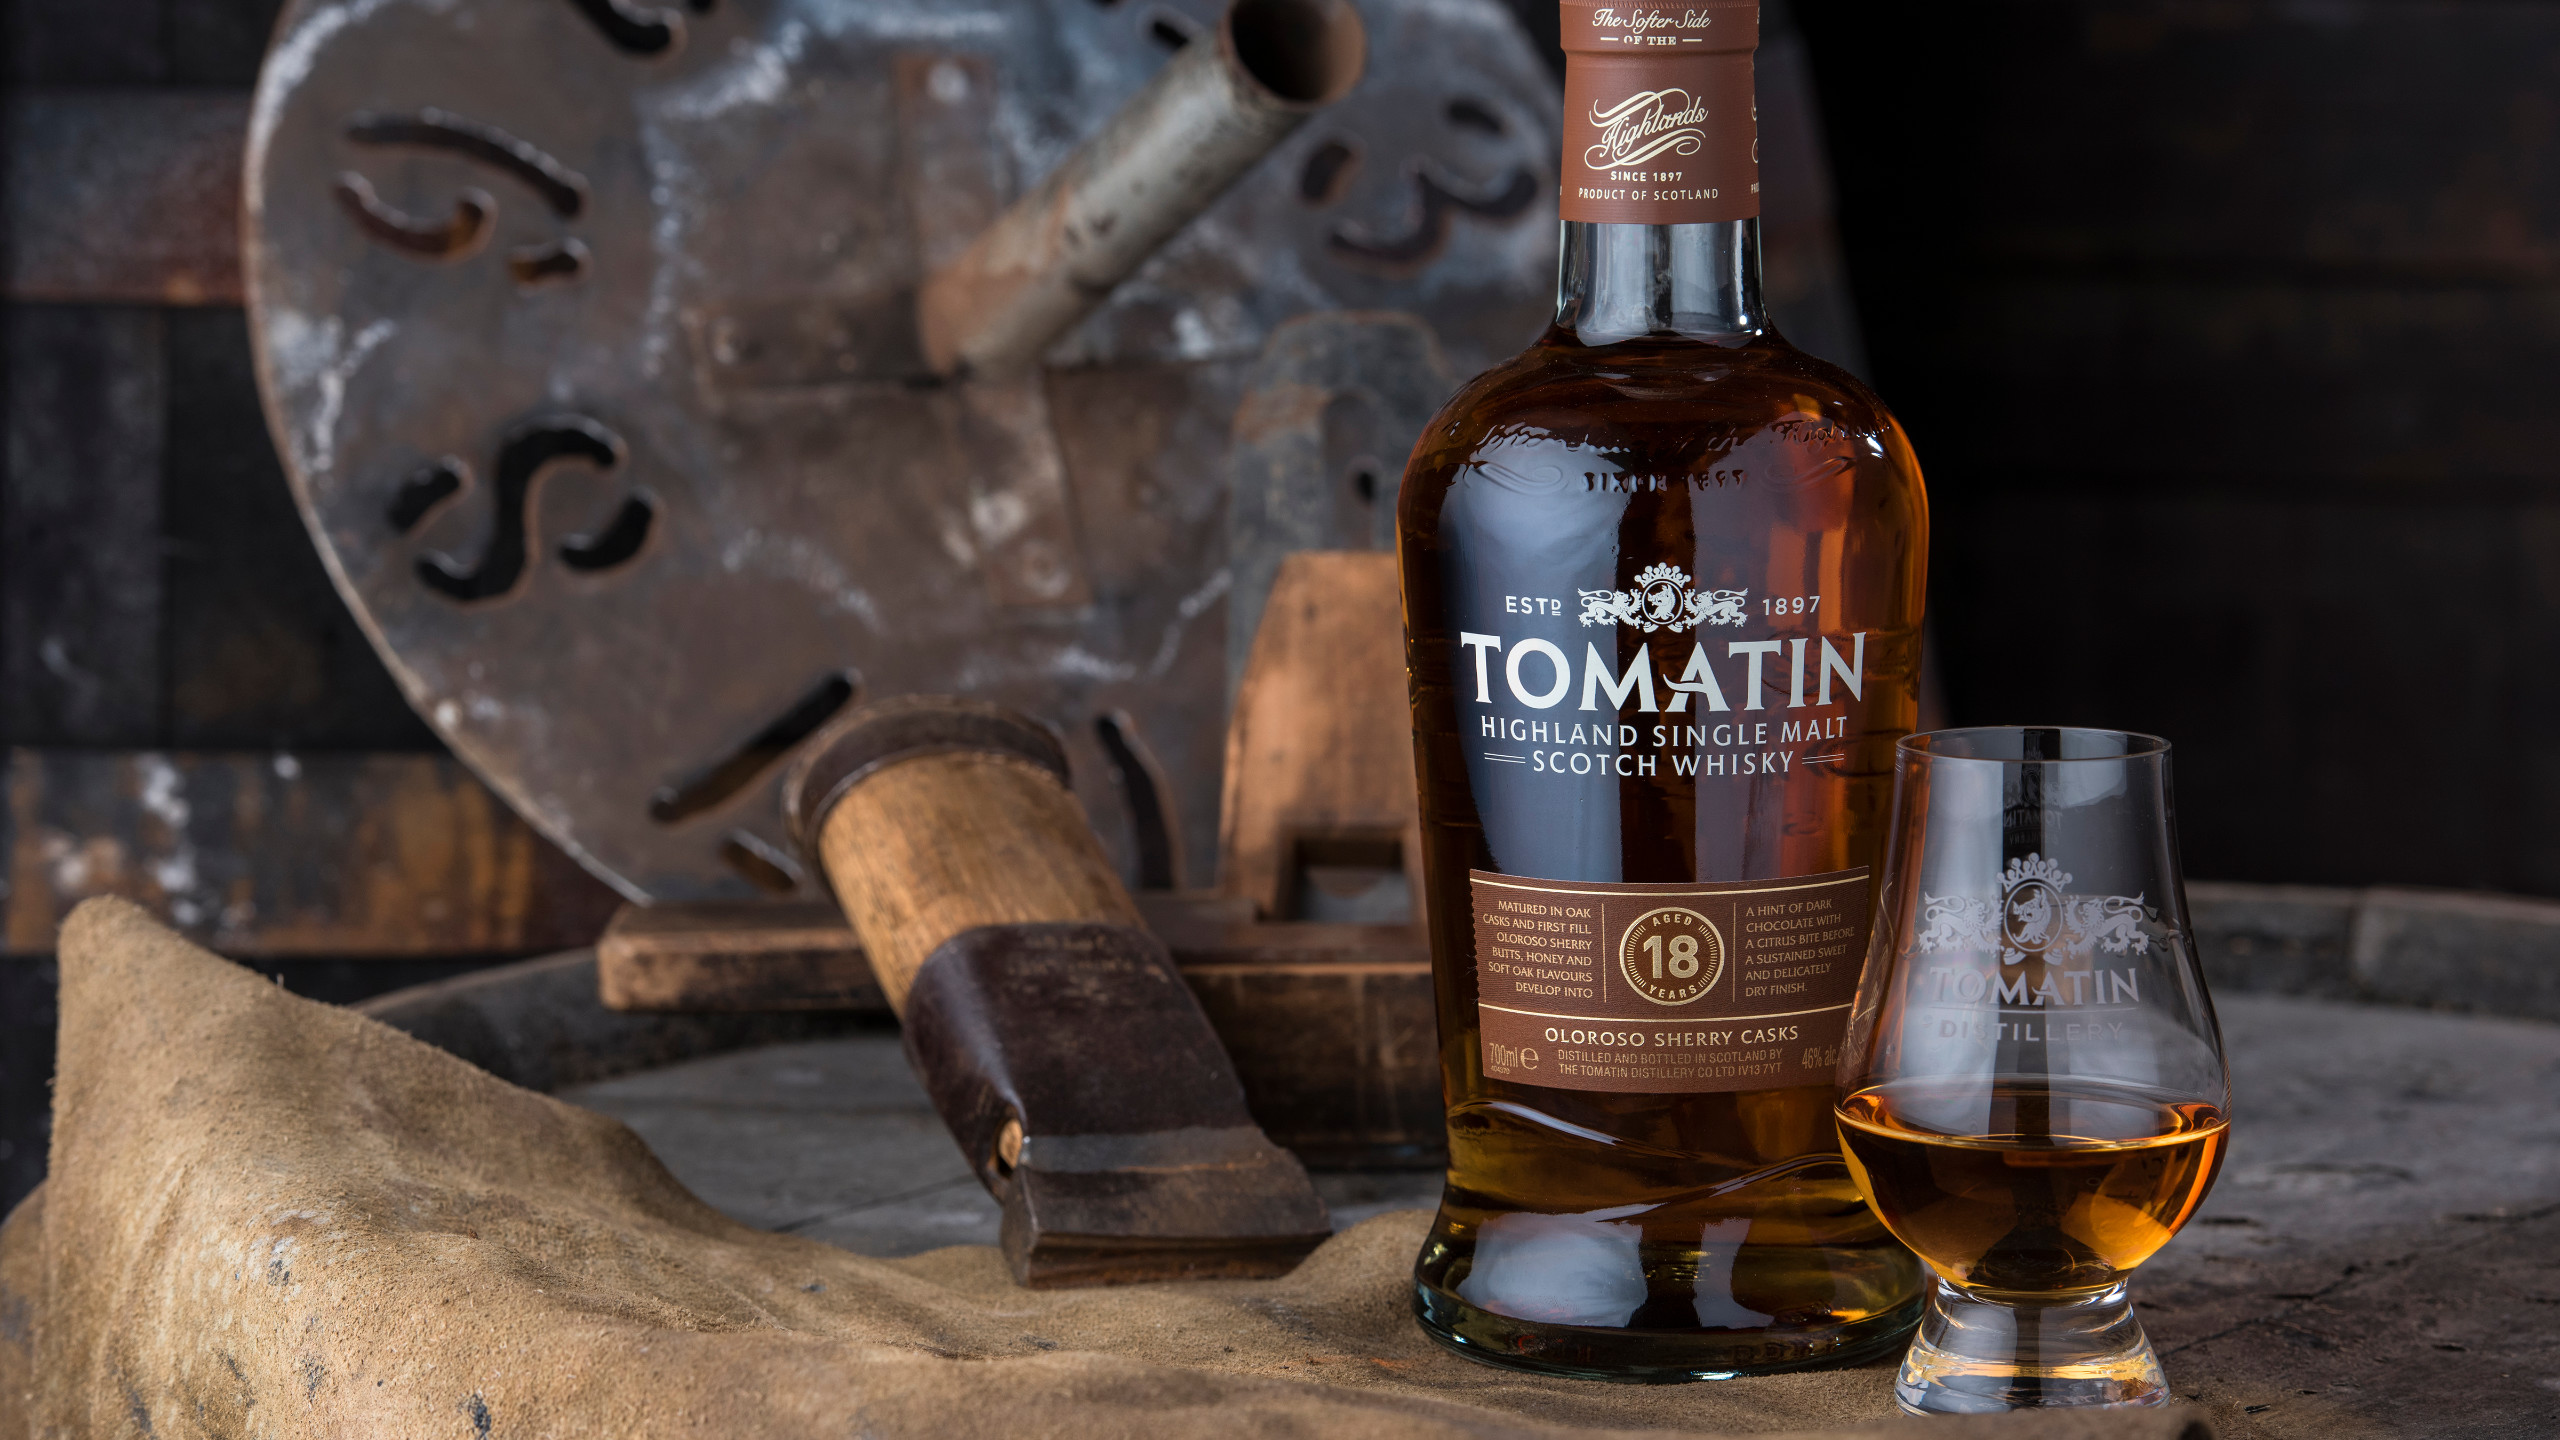 A bottle of Tomatin Scotch Whisky on a barrel with vintage tools